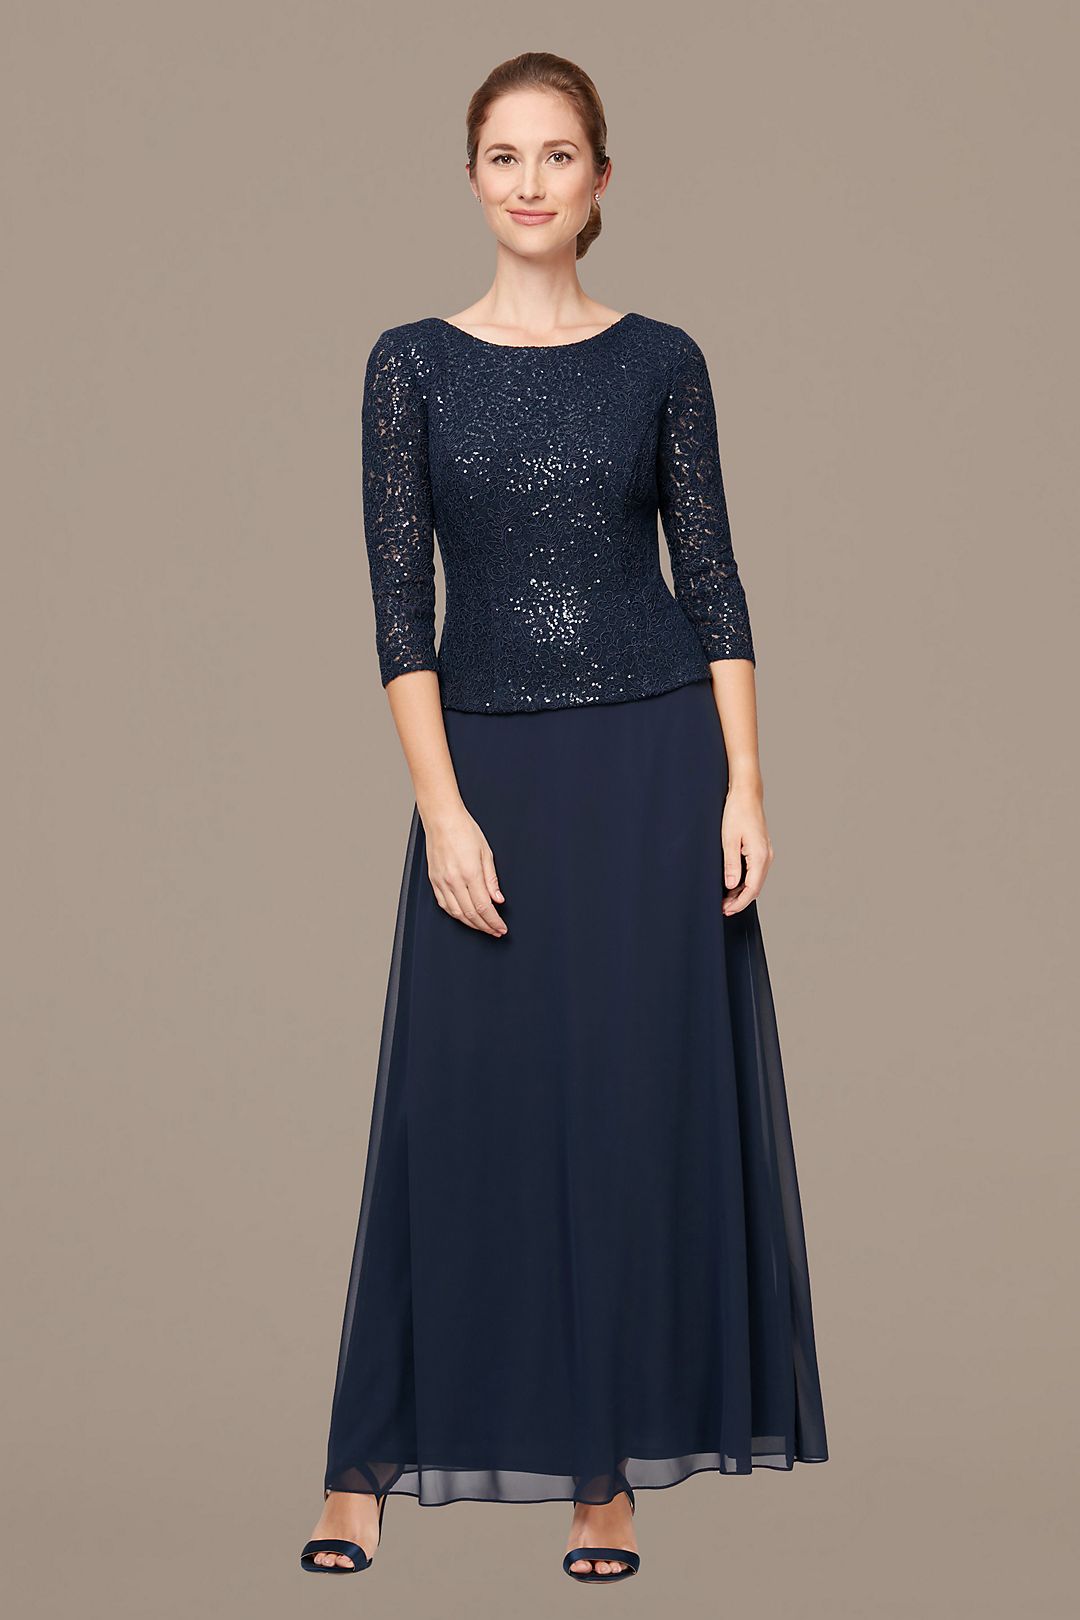 Sequin Lace 3/4 Sleeve Dress with Chiffon Skirt Image 3